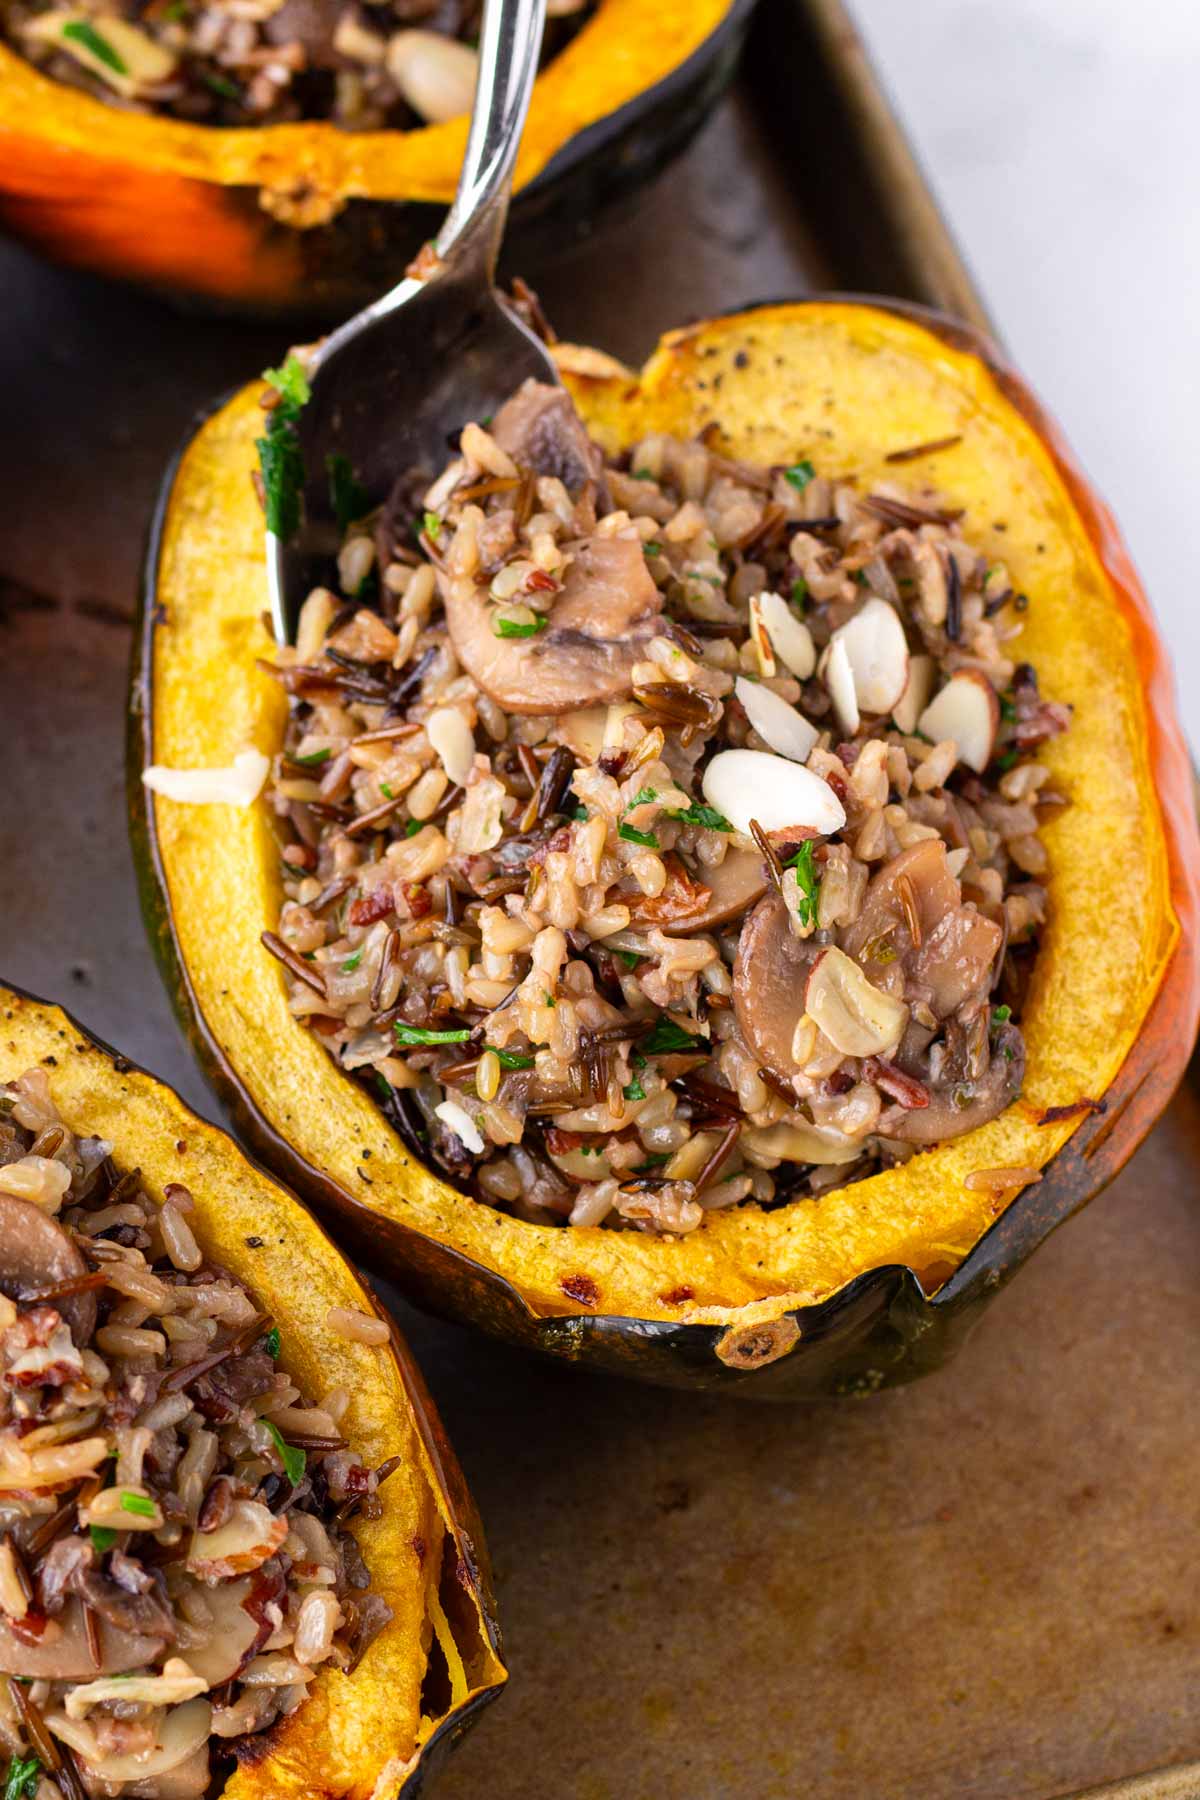 spooning filling into a roasted acorn squash